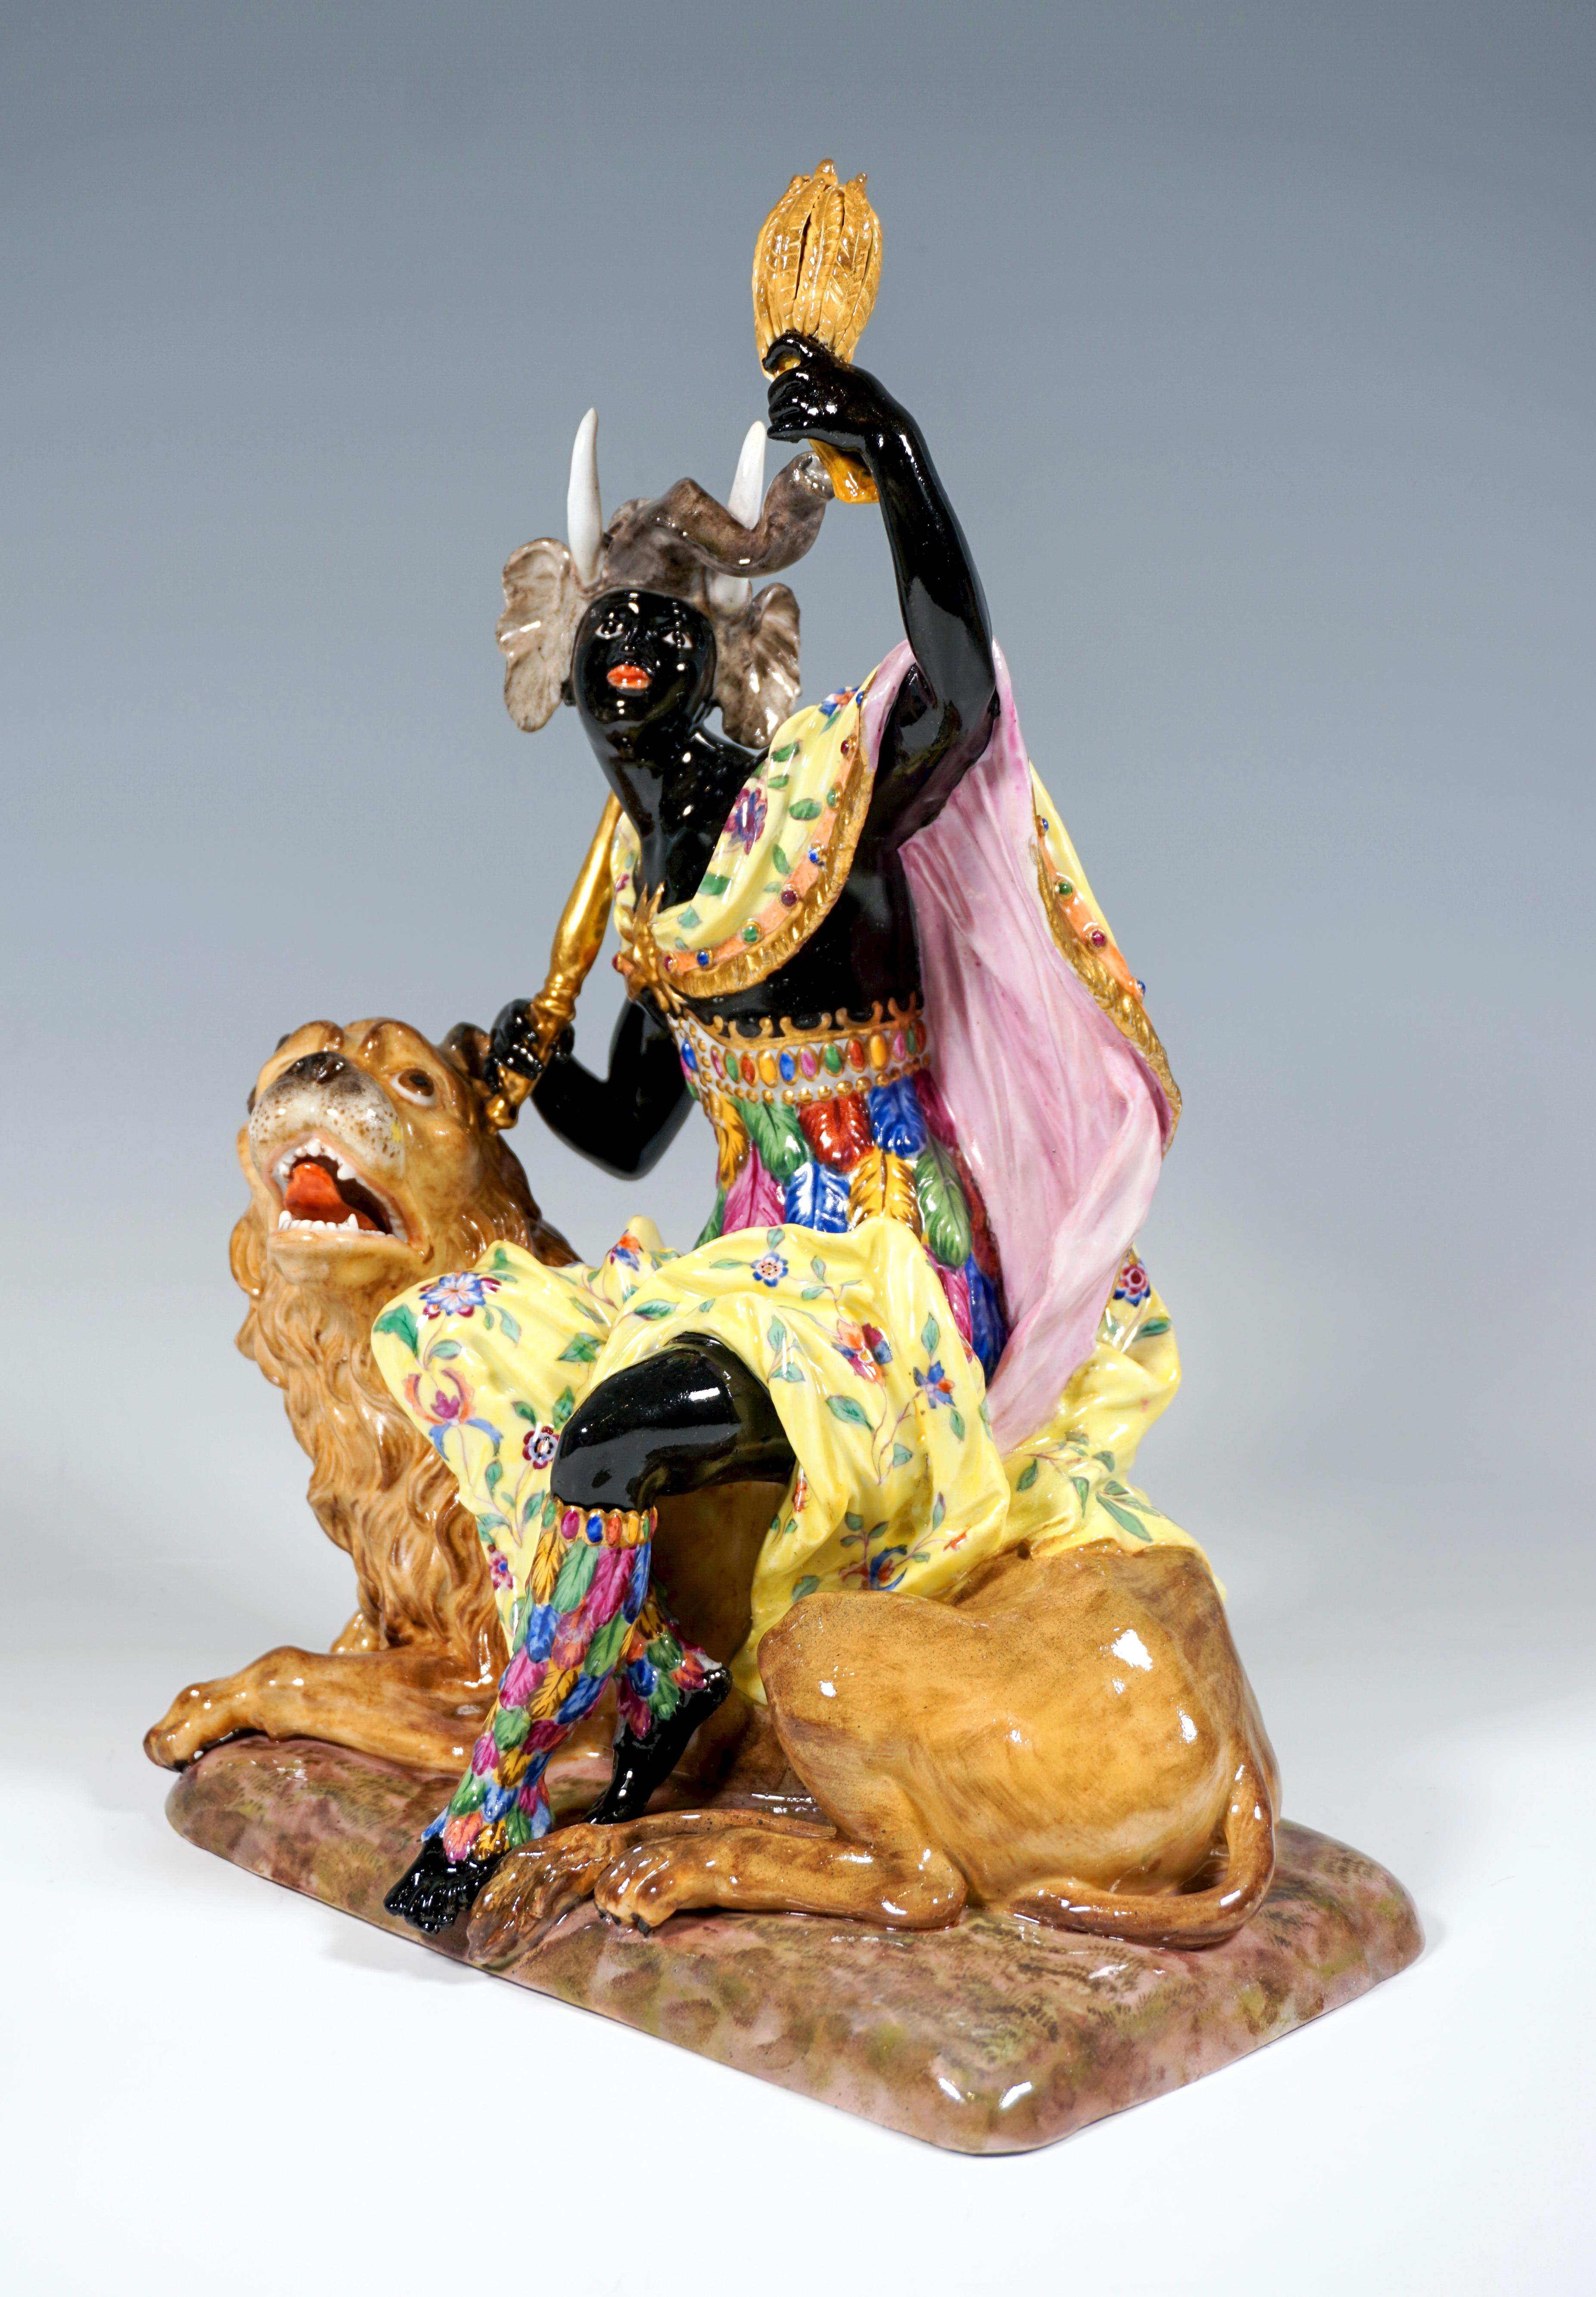 Personification of the continent of Africa as a dark-skinned woman who sits on a lion lying on the ground with its mouth open. Her waist and lower legs are dressed in brightly colored feathers, and her legs are wrapped in a wide skirt. Her shoulder